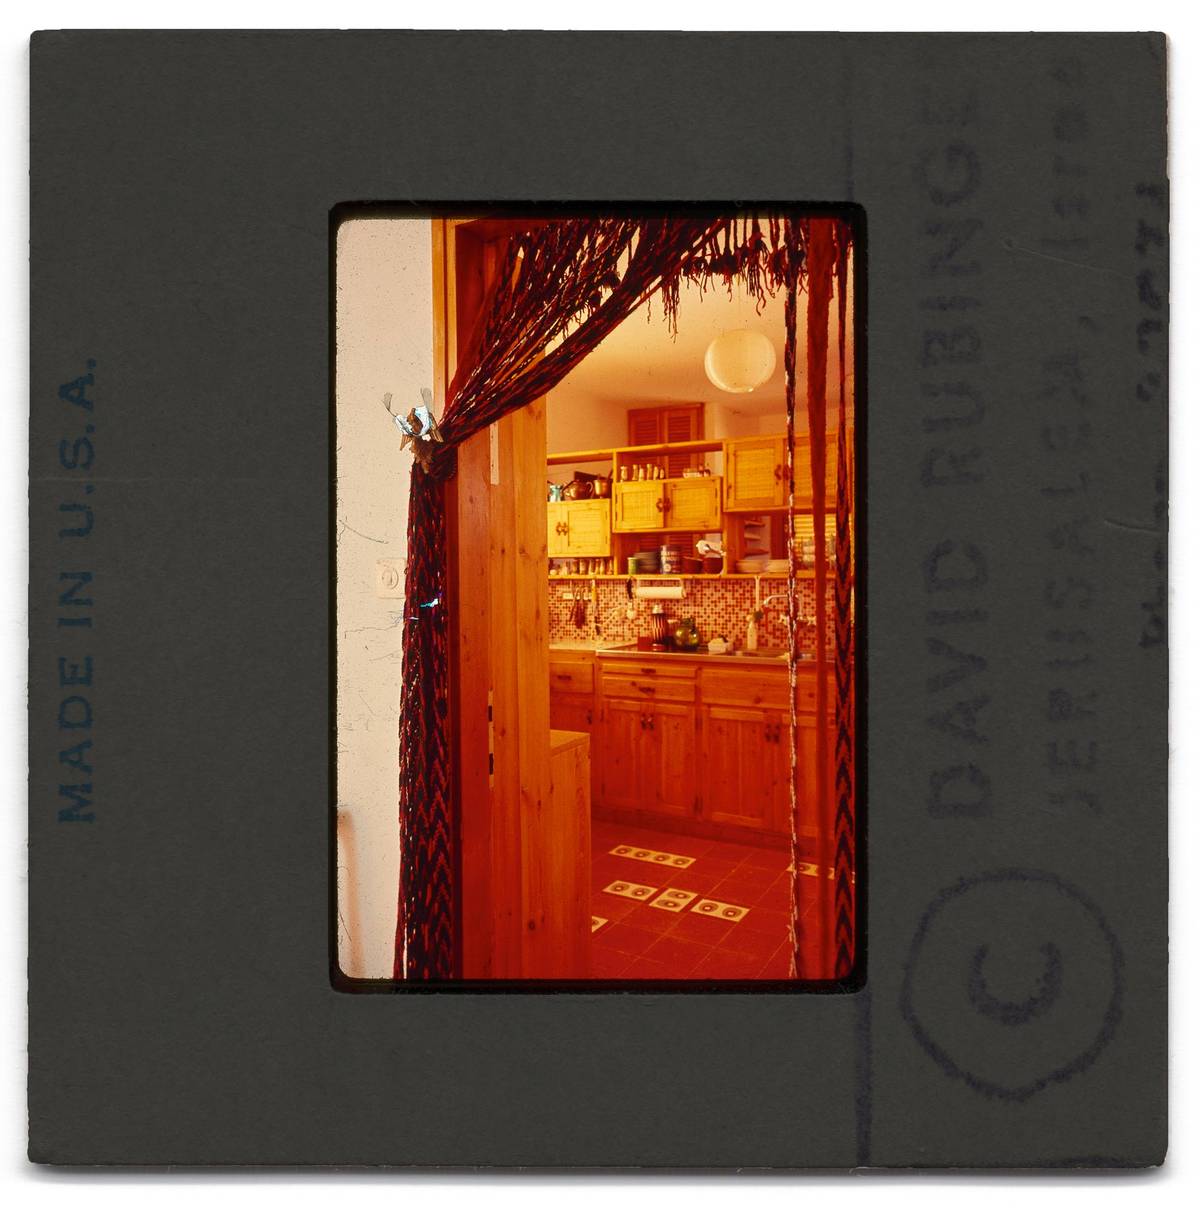 Although neither of my parents did much cooking, the wood cabinetry and deep red floor tiles made this the warmest room in the house. The repurposed Bedouin camel belts made for an effective screen between the kitchen and dining room.